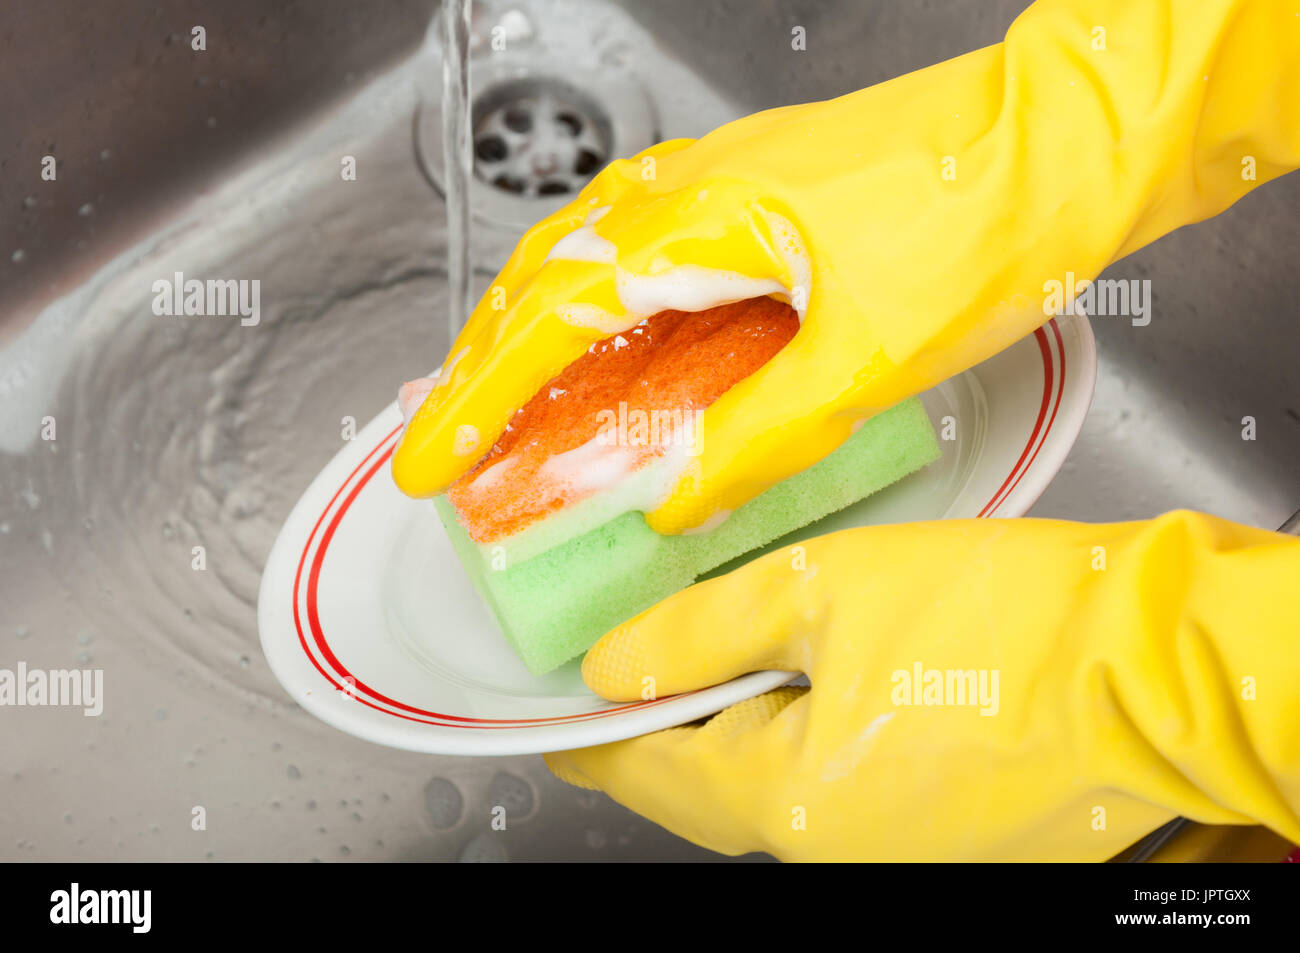 Cleaning lady or housewife with rubber gloves and sponge washing dish in close-up Stock Photo